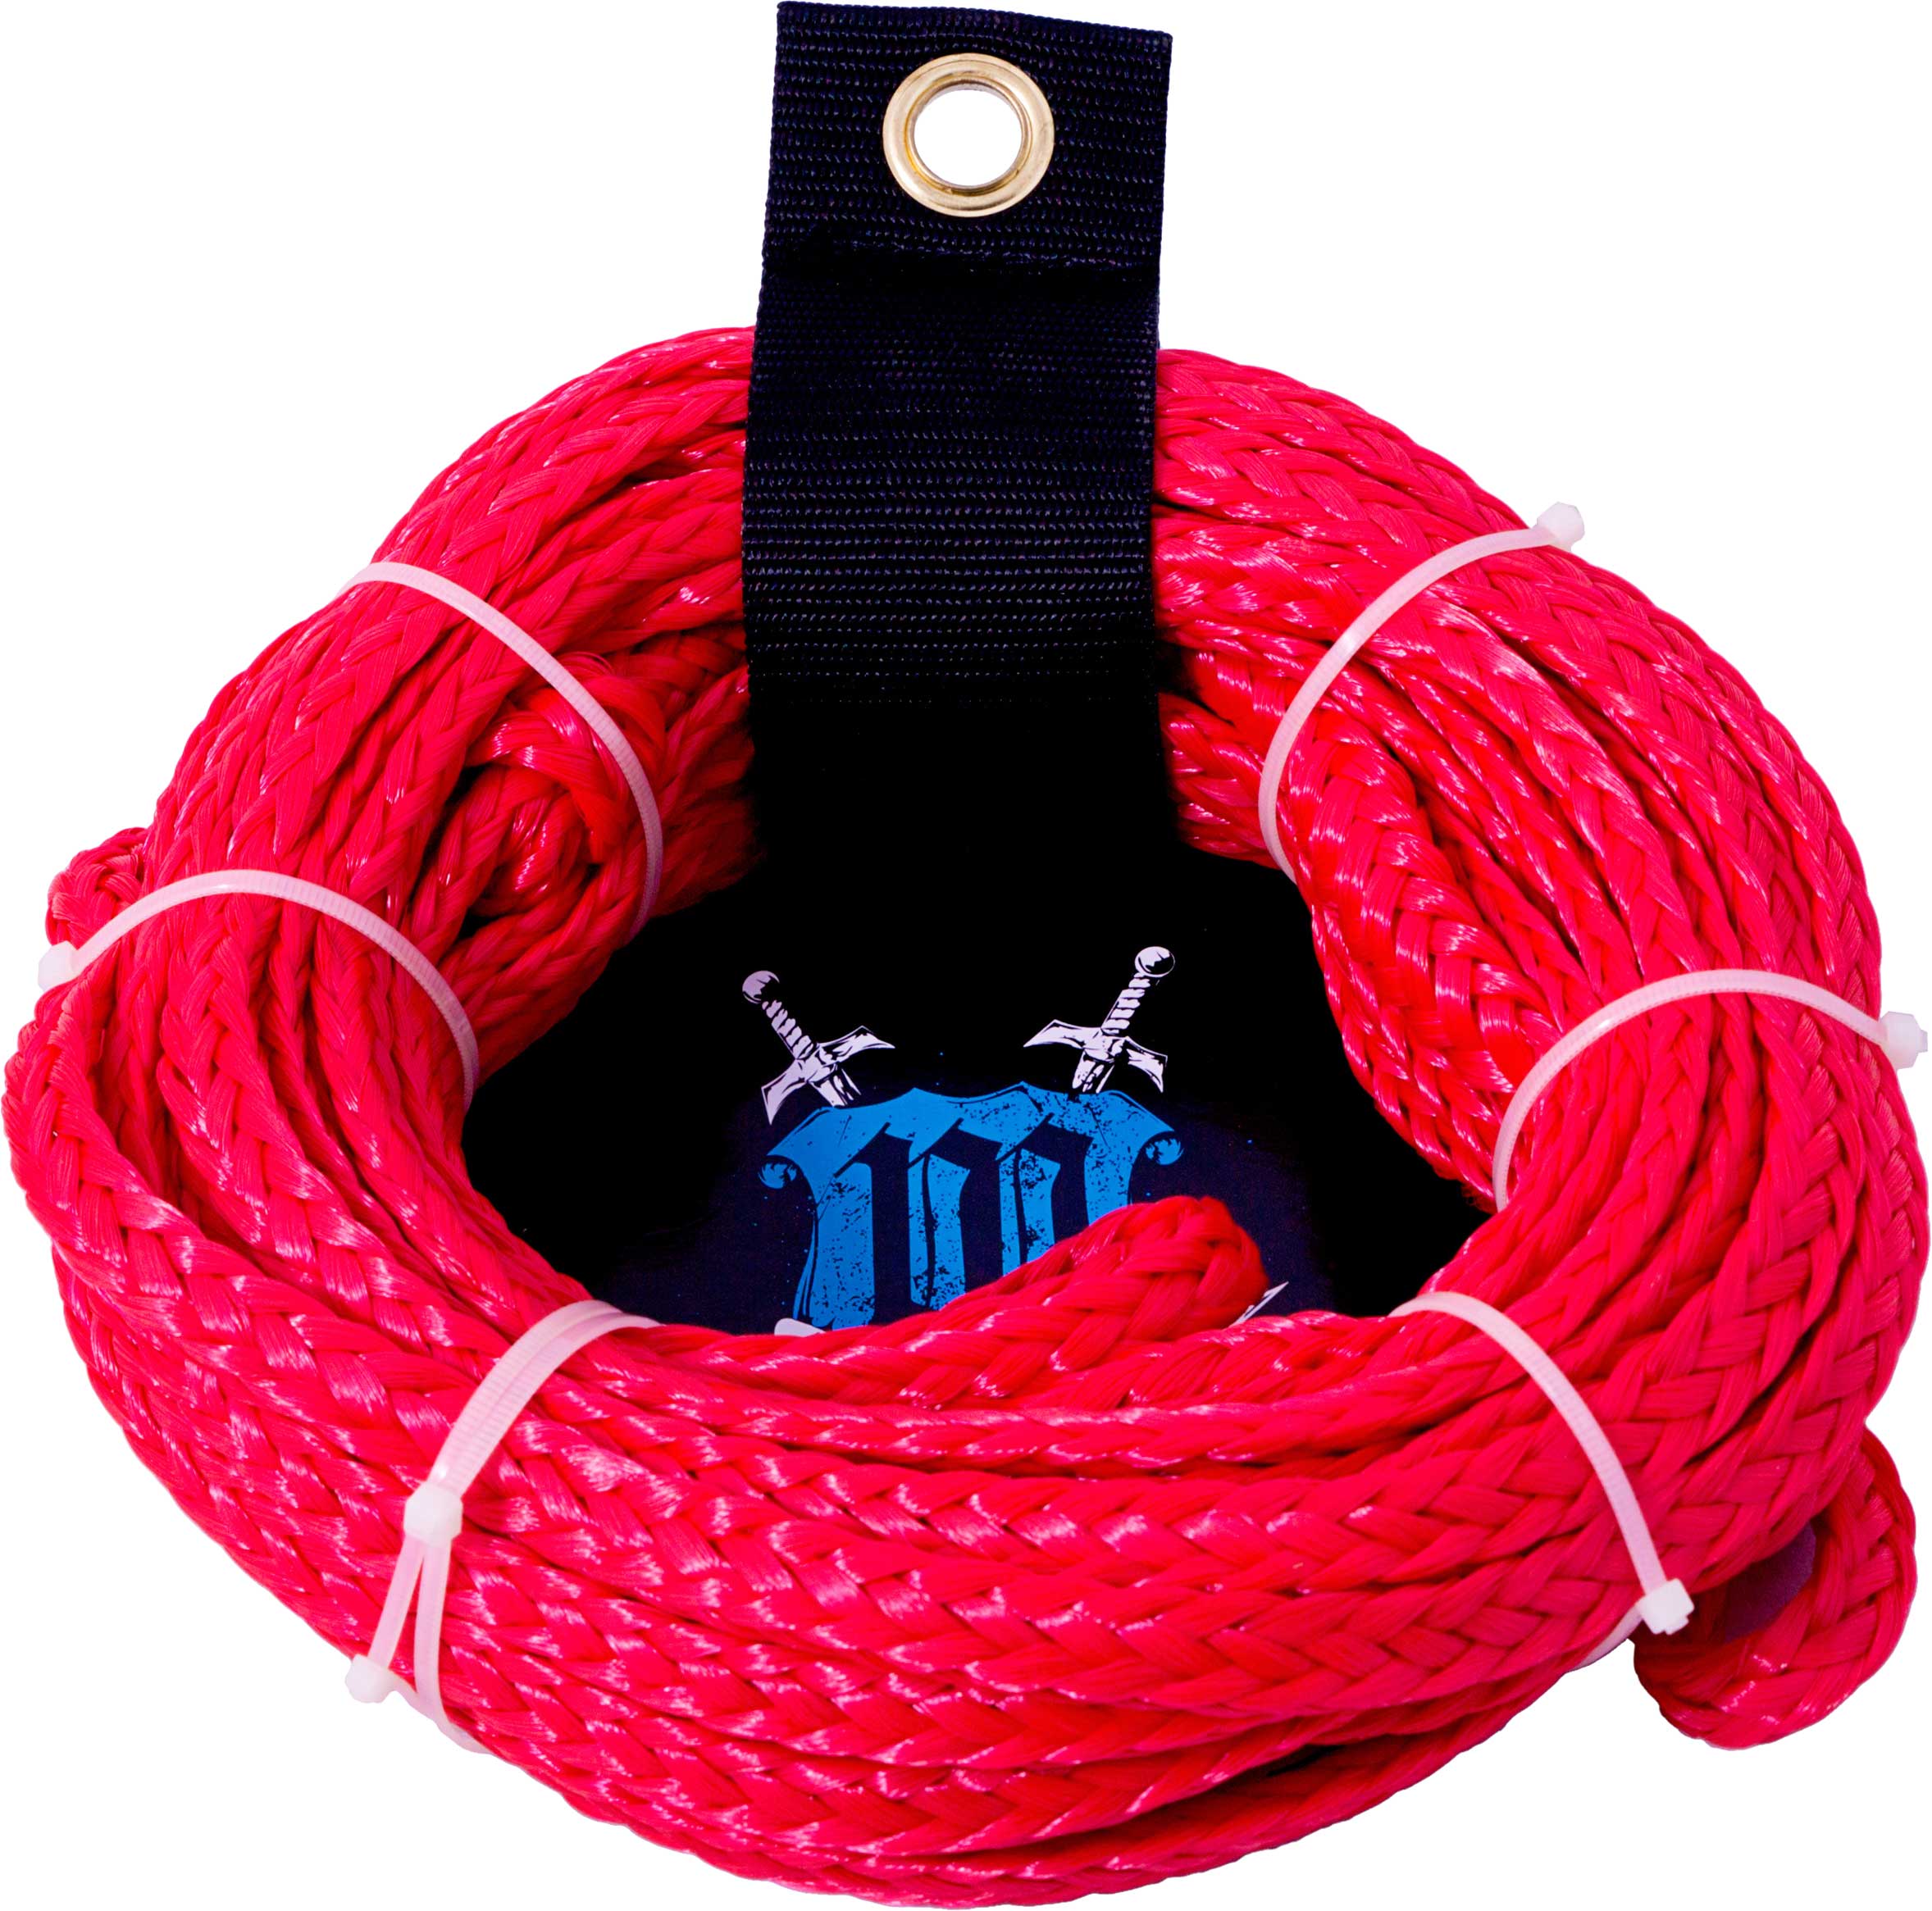 WILLIAMS 2 PERSON TUBE ROPE